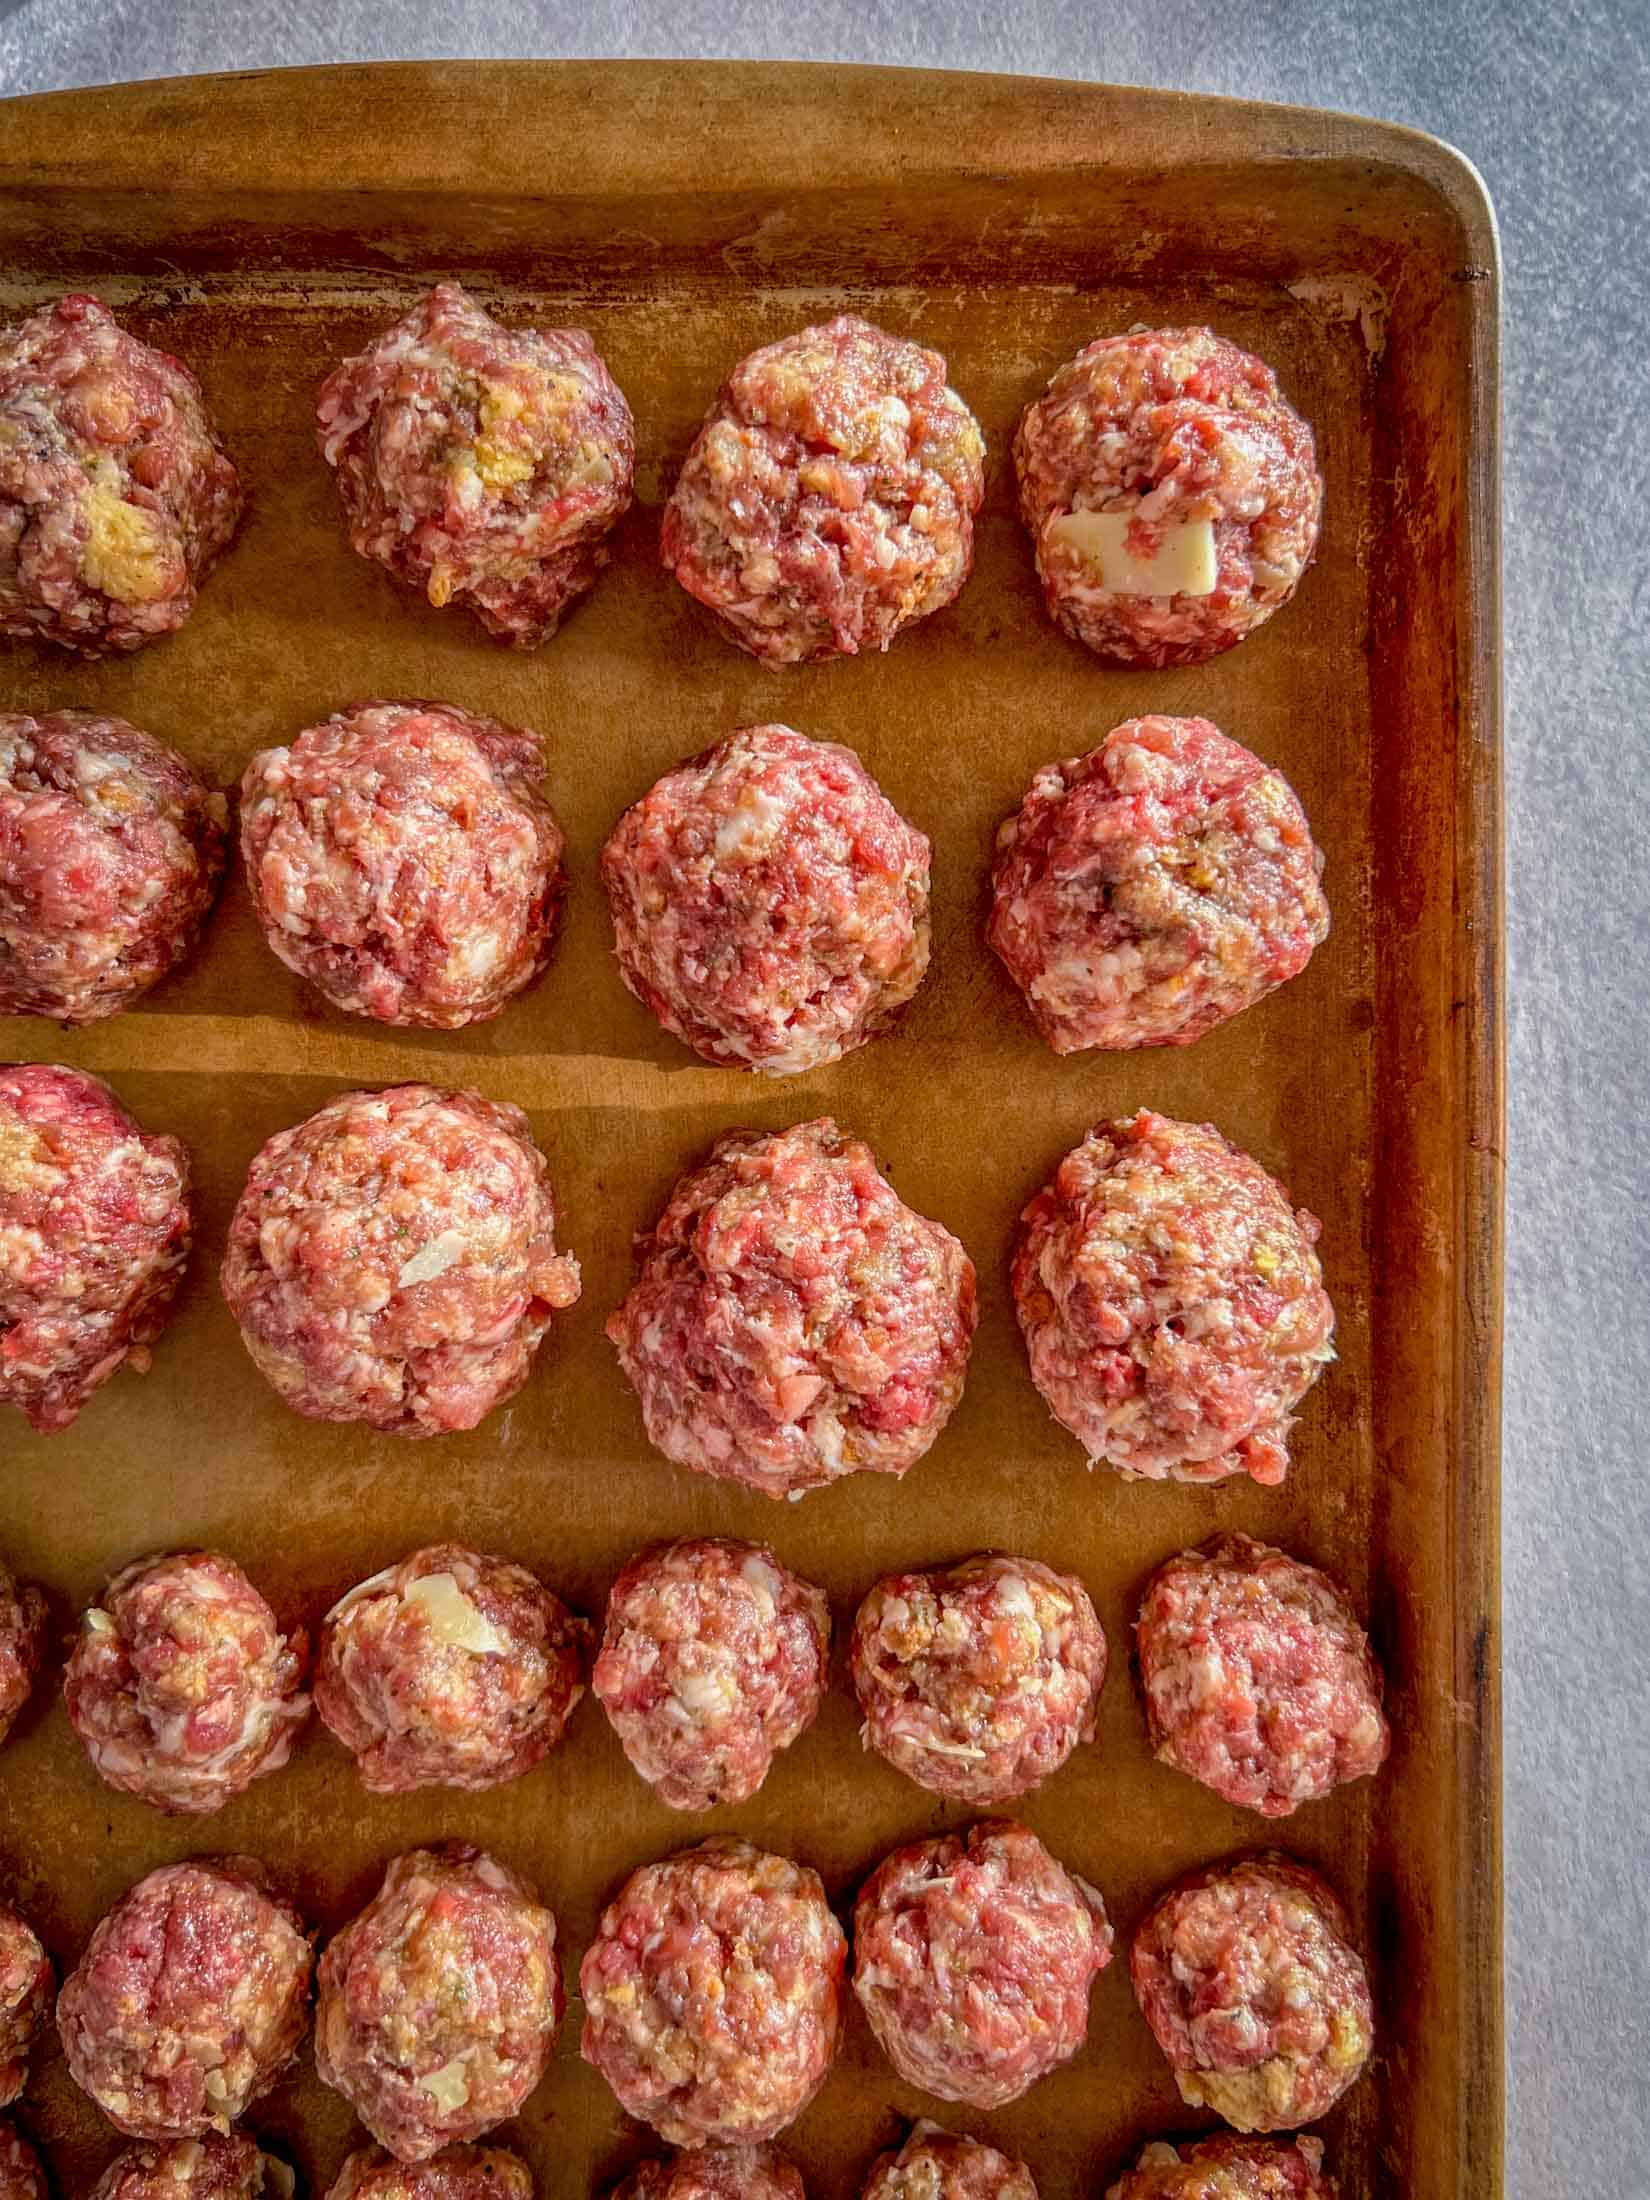 A mixture of large and small venison meatballs on a cookie sheet.